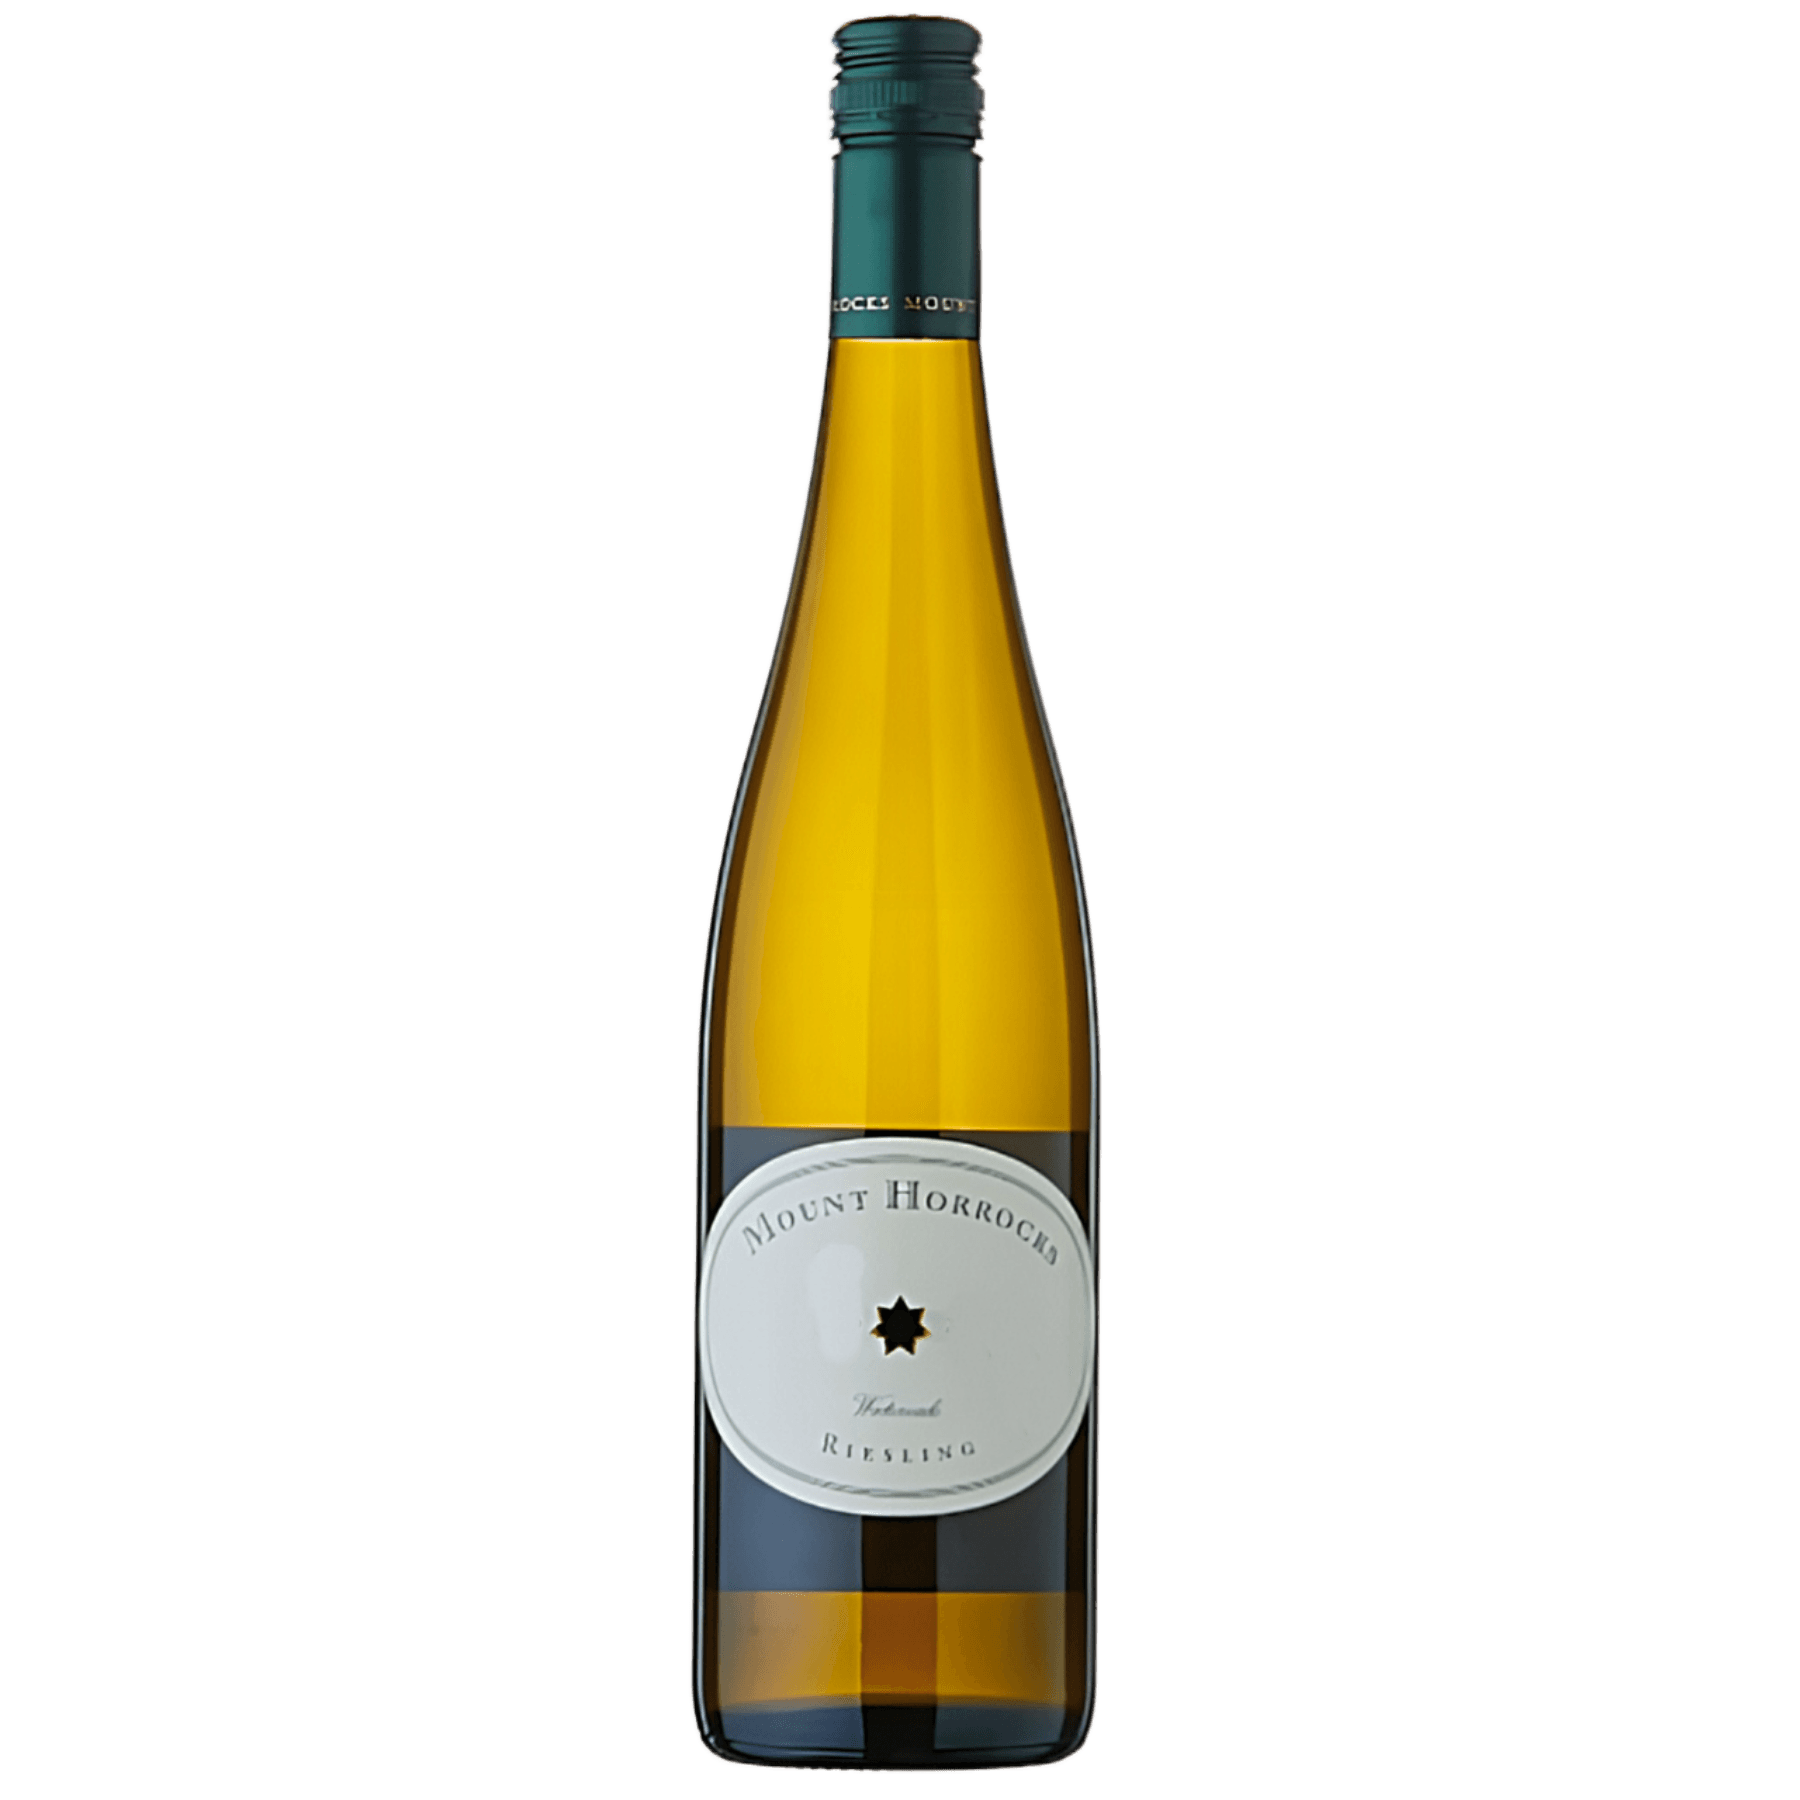 2013 Mount Horrocks - Riesling Clare Valley